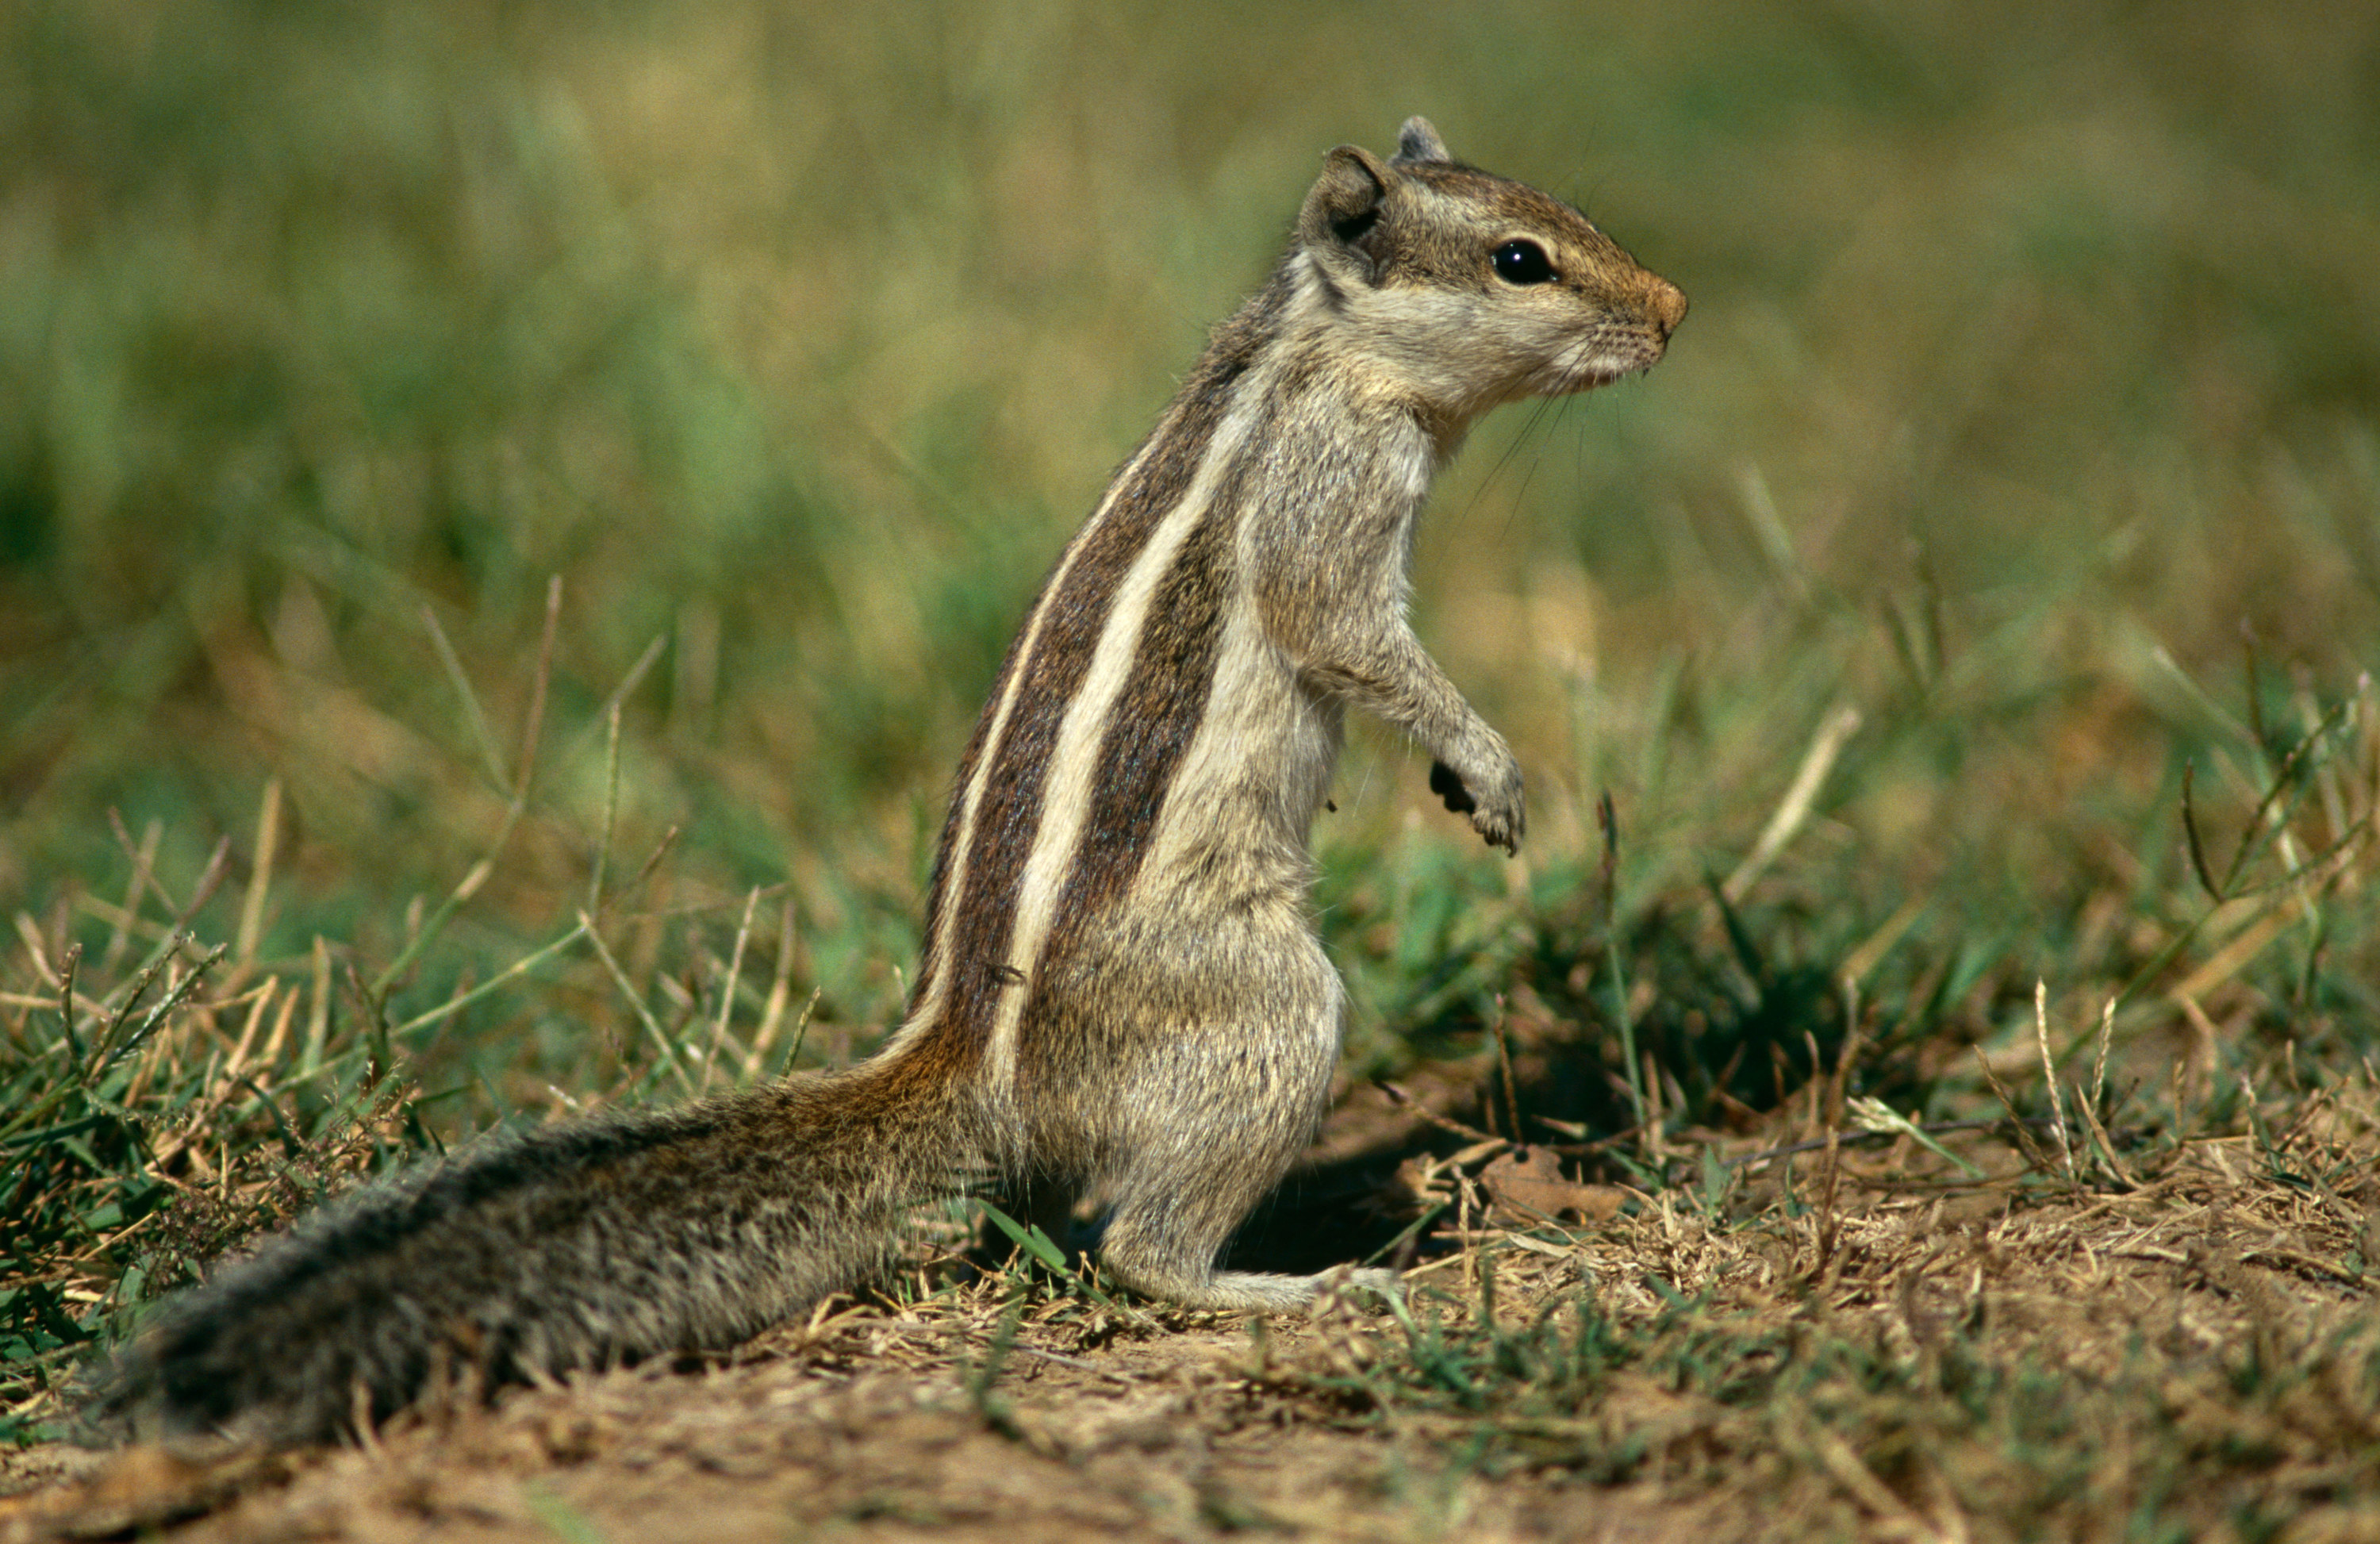 stripped squirrel in the grass